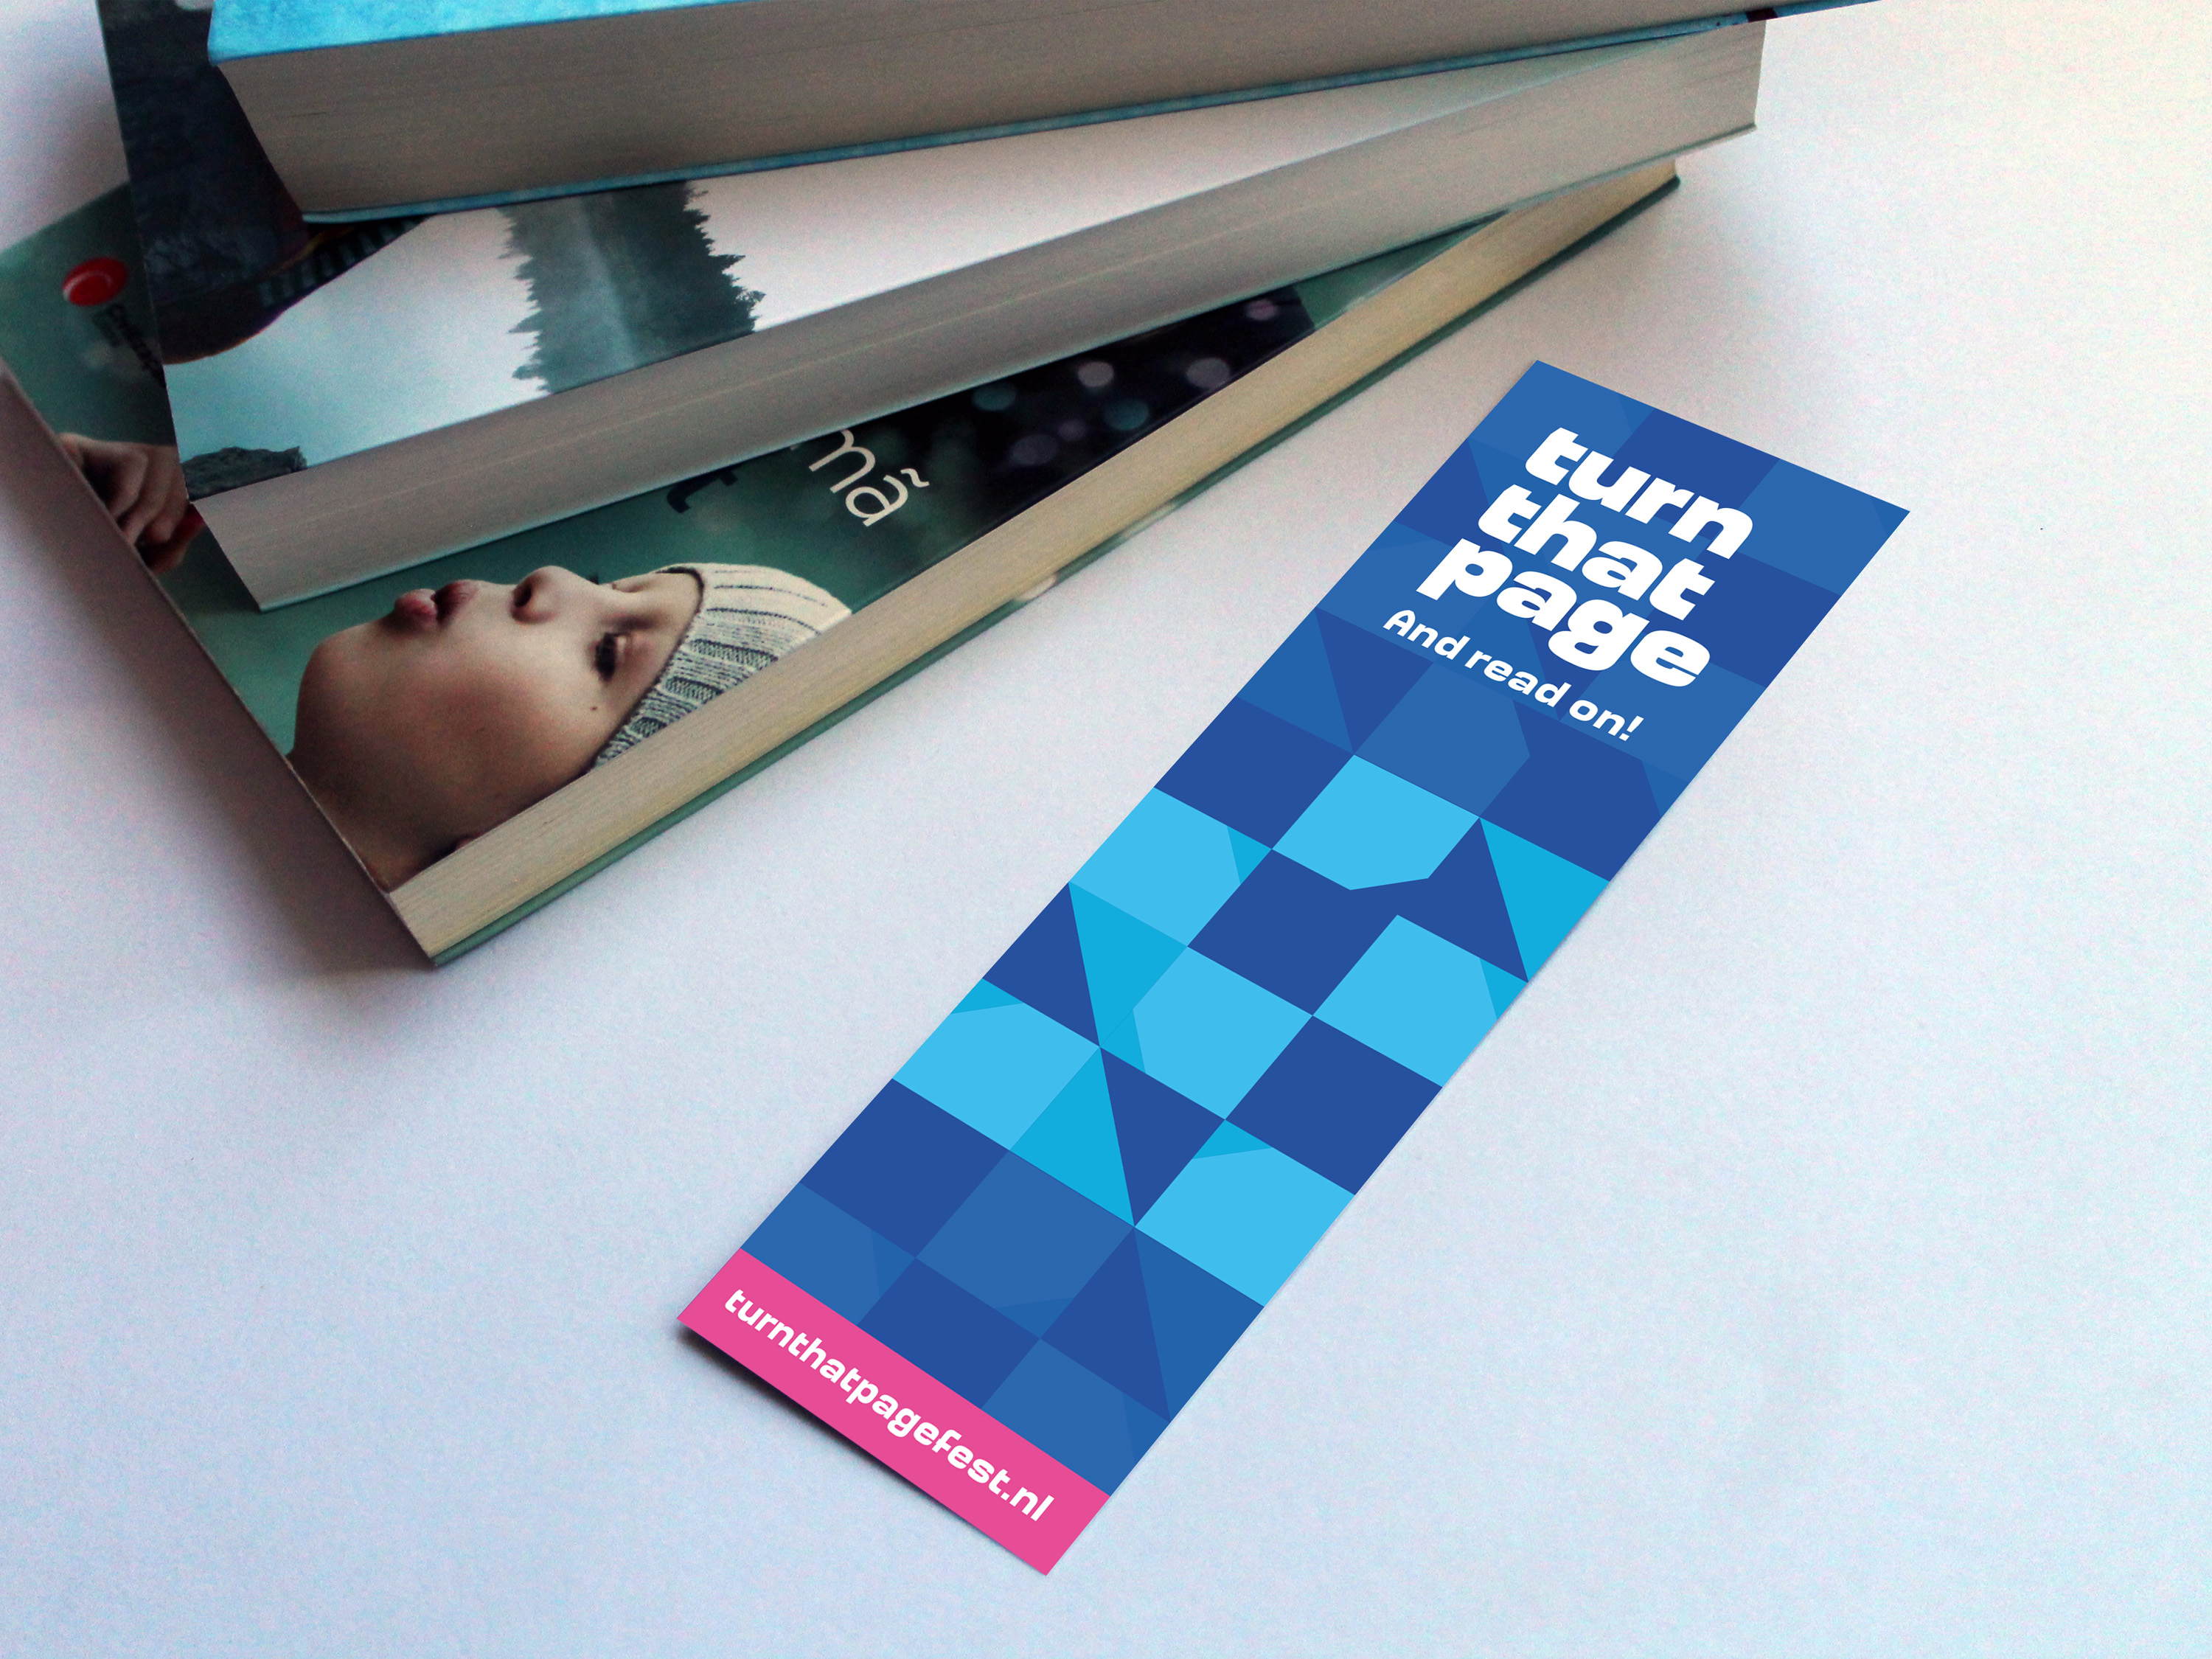 bookmark of a festival about reading